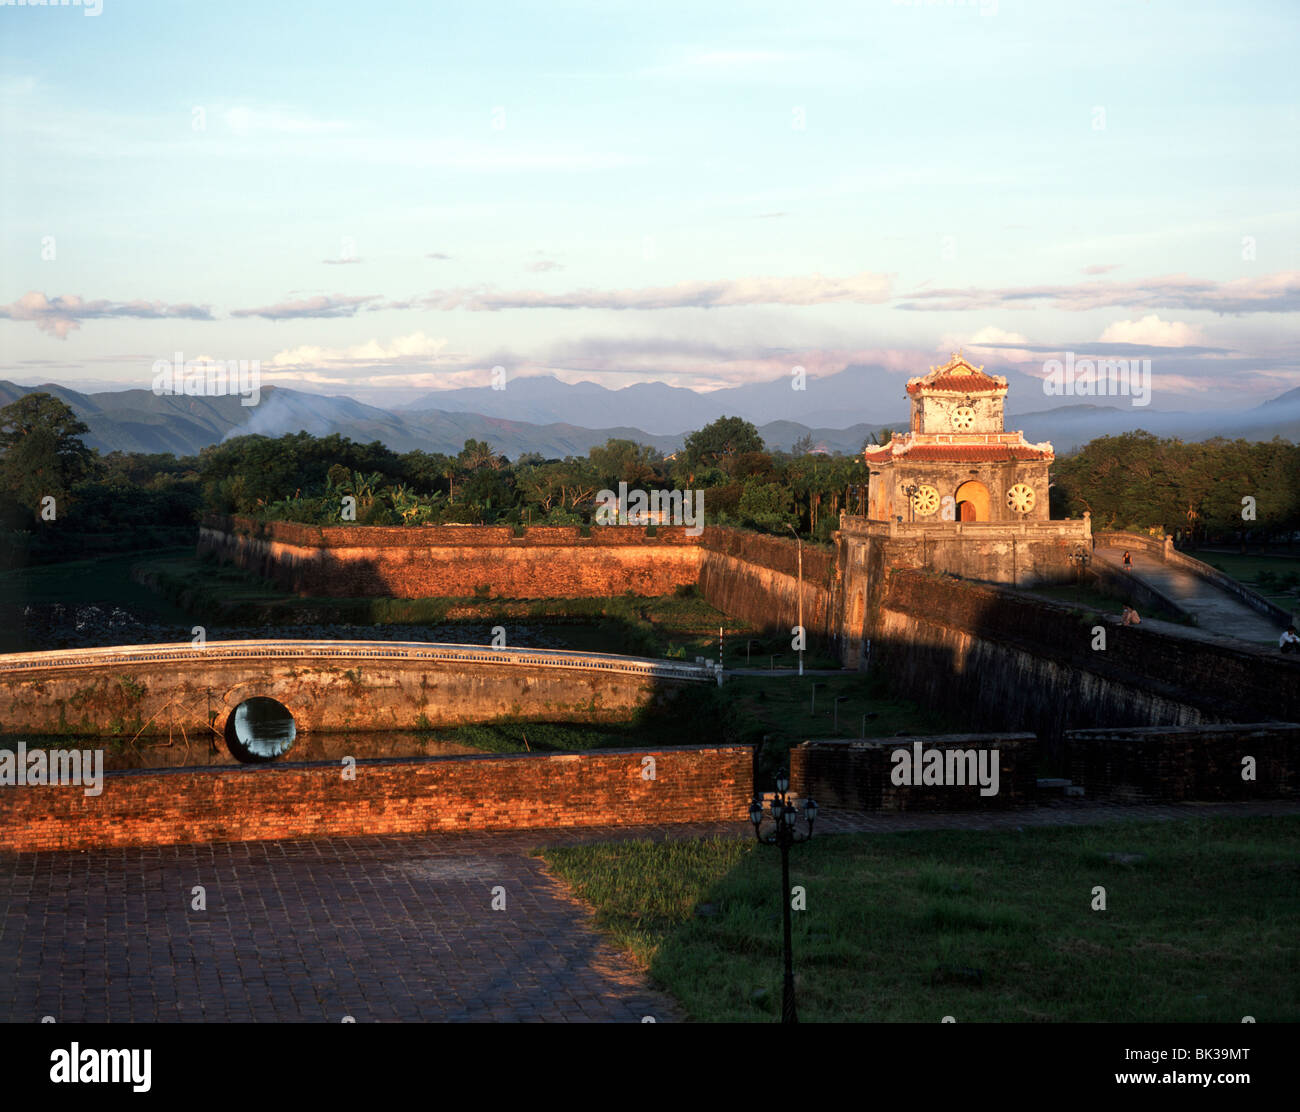 The Citadel at Hue, UNESCO World Heritage Site, Vietnam, Indochina, Southeast Asia, Asia Stock Photo